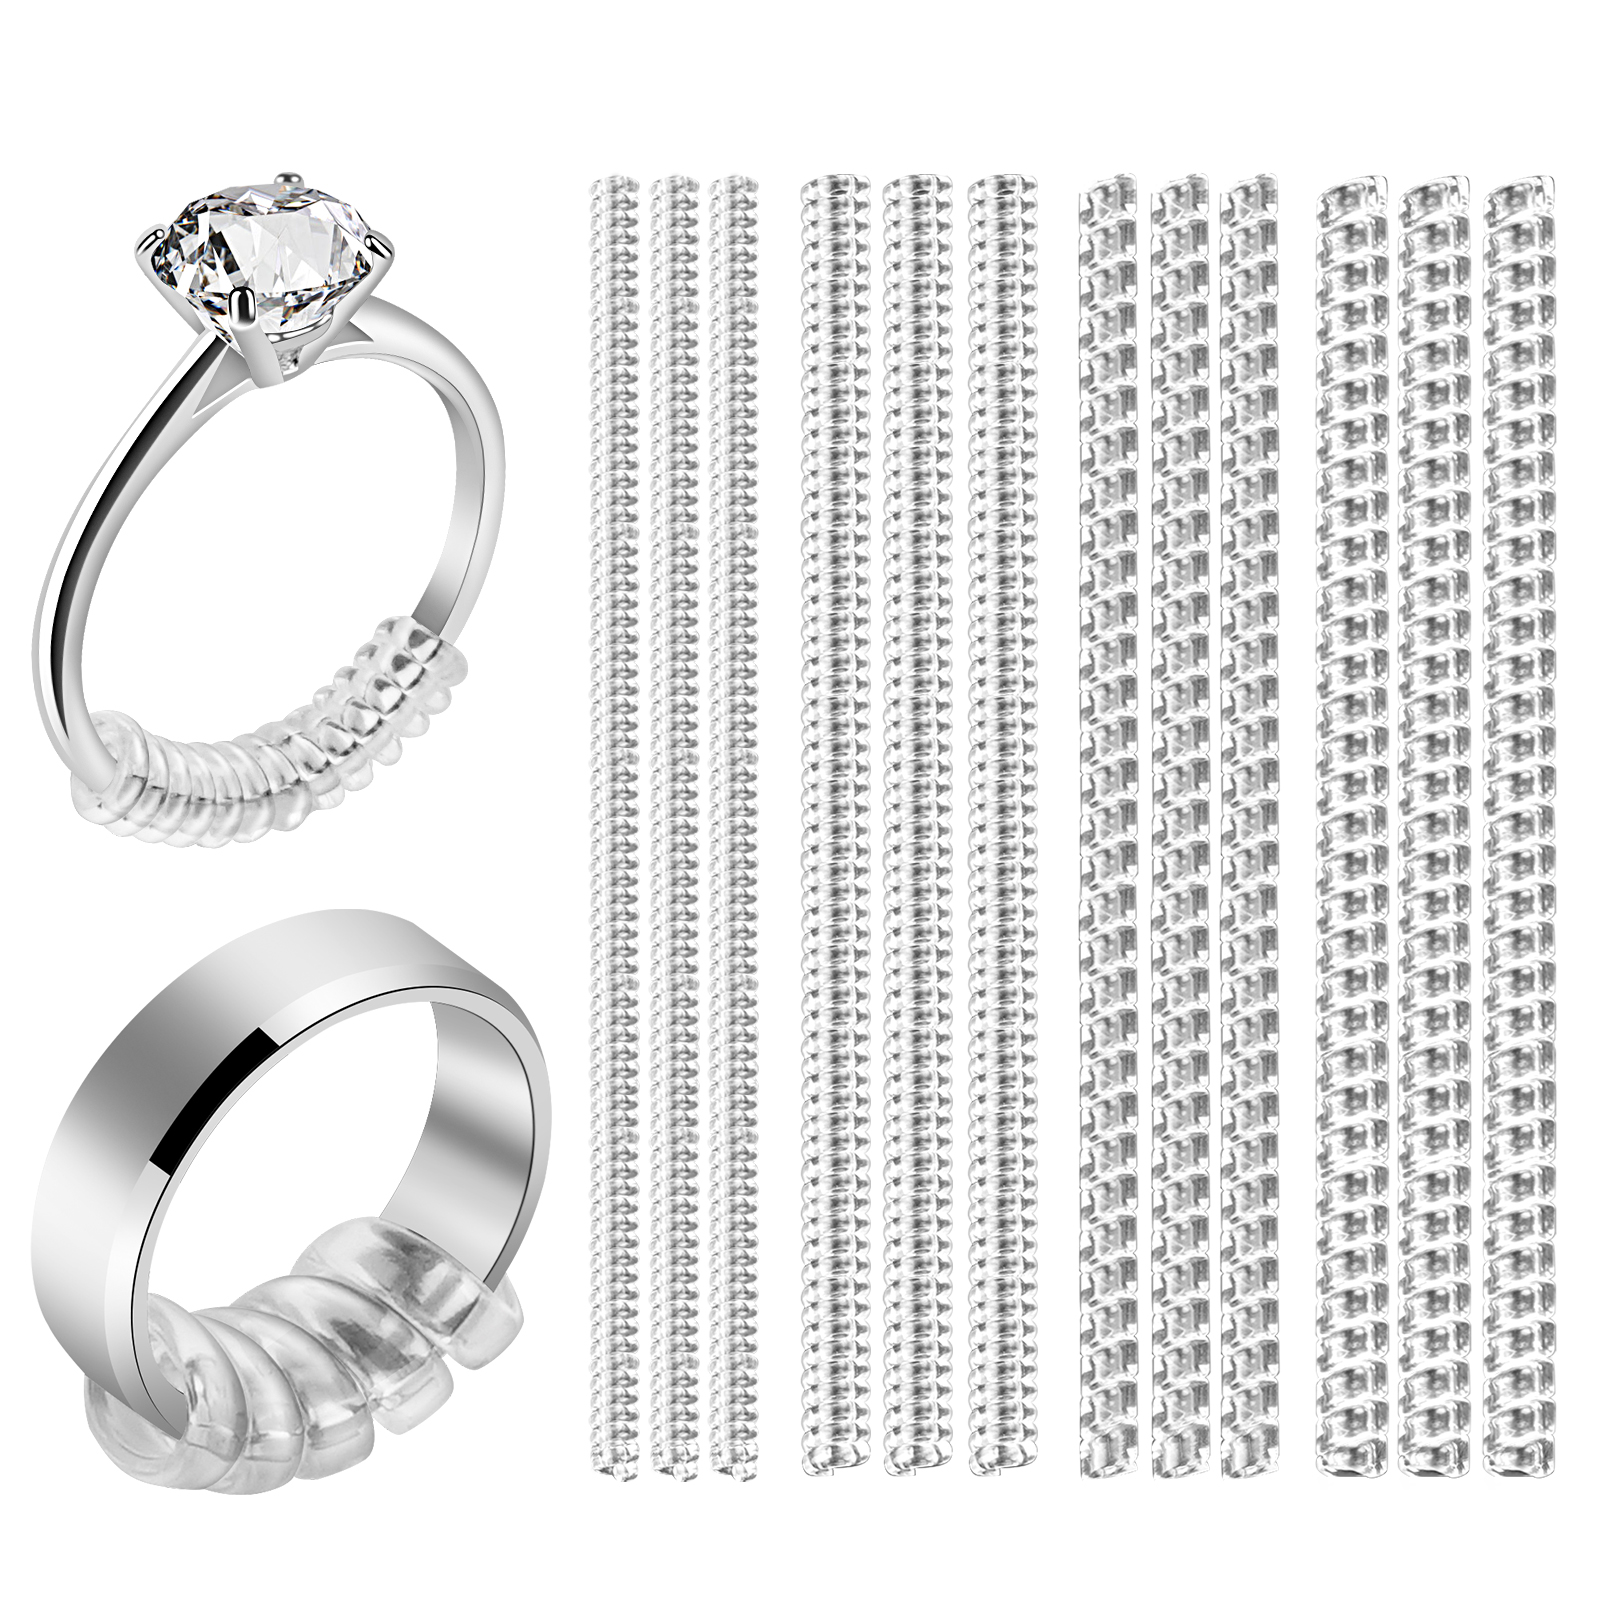 Free Ring Size Adjusters, ring, freight transport, 💎 New Ring Size  Adjusters 💍 FREE for a LIMITED TIME - Just Pay Shipping 😲 ✨ Claim Offer  Here 👇👇👇, By Ring Size Adjuster